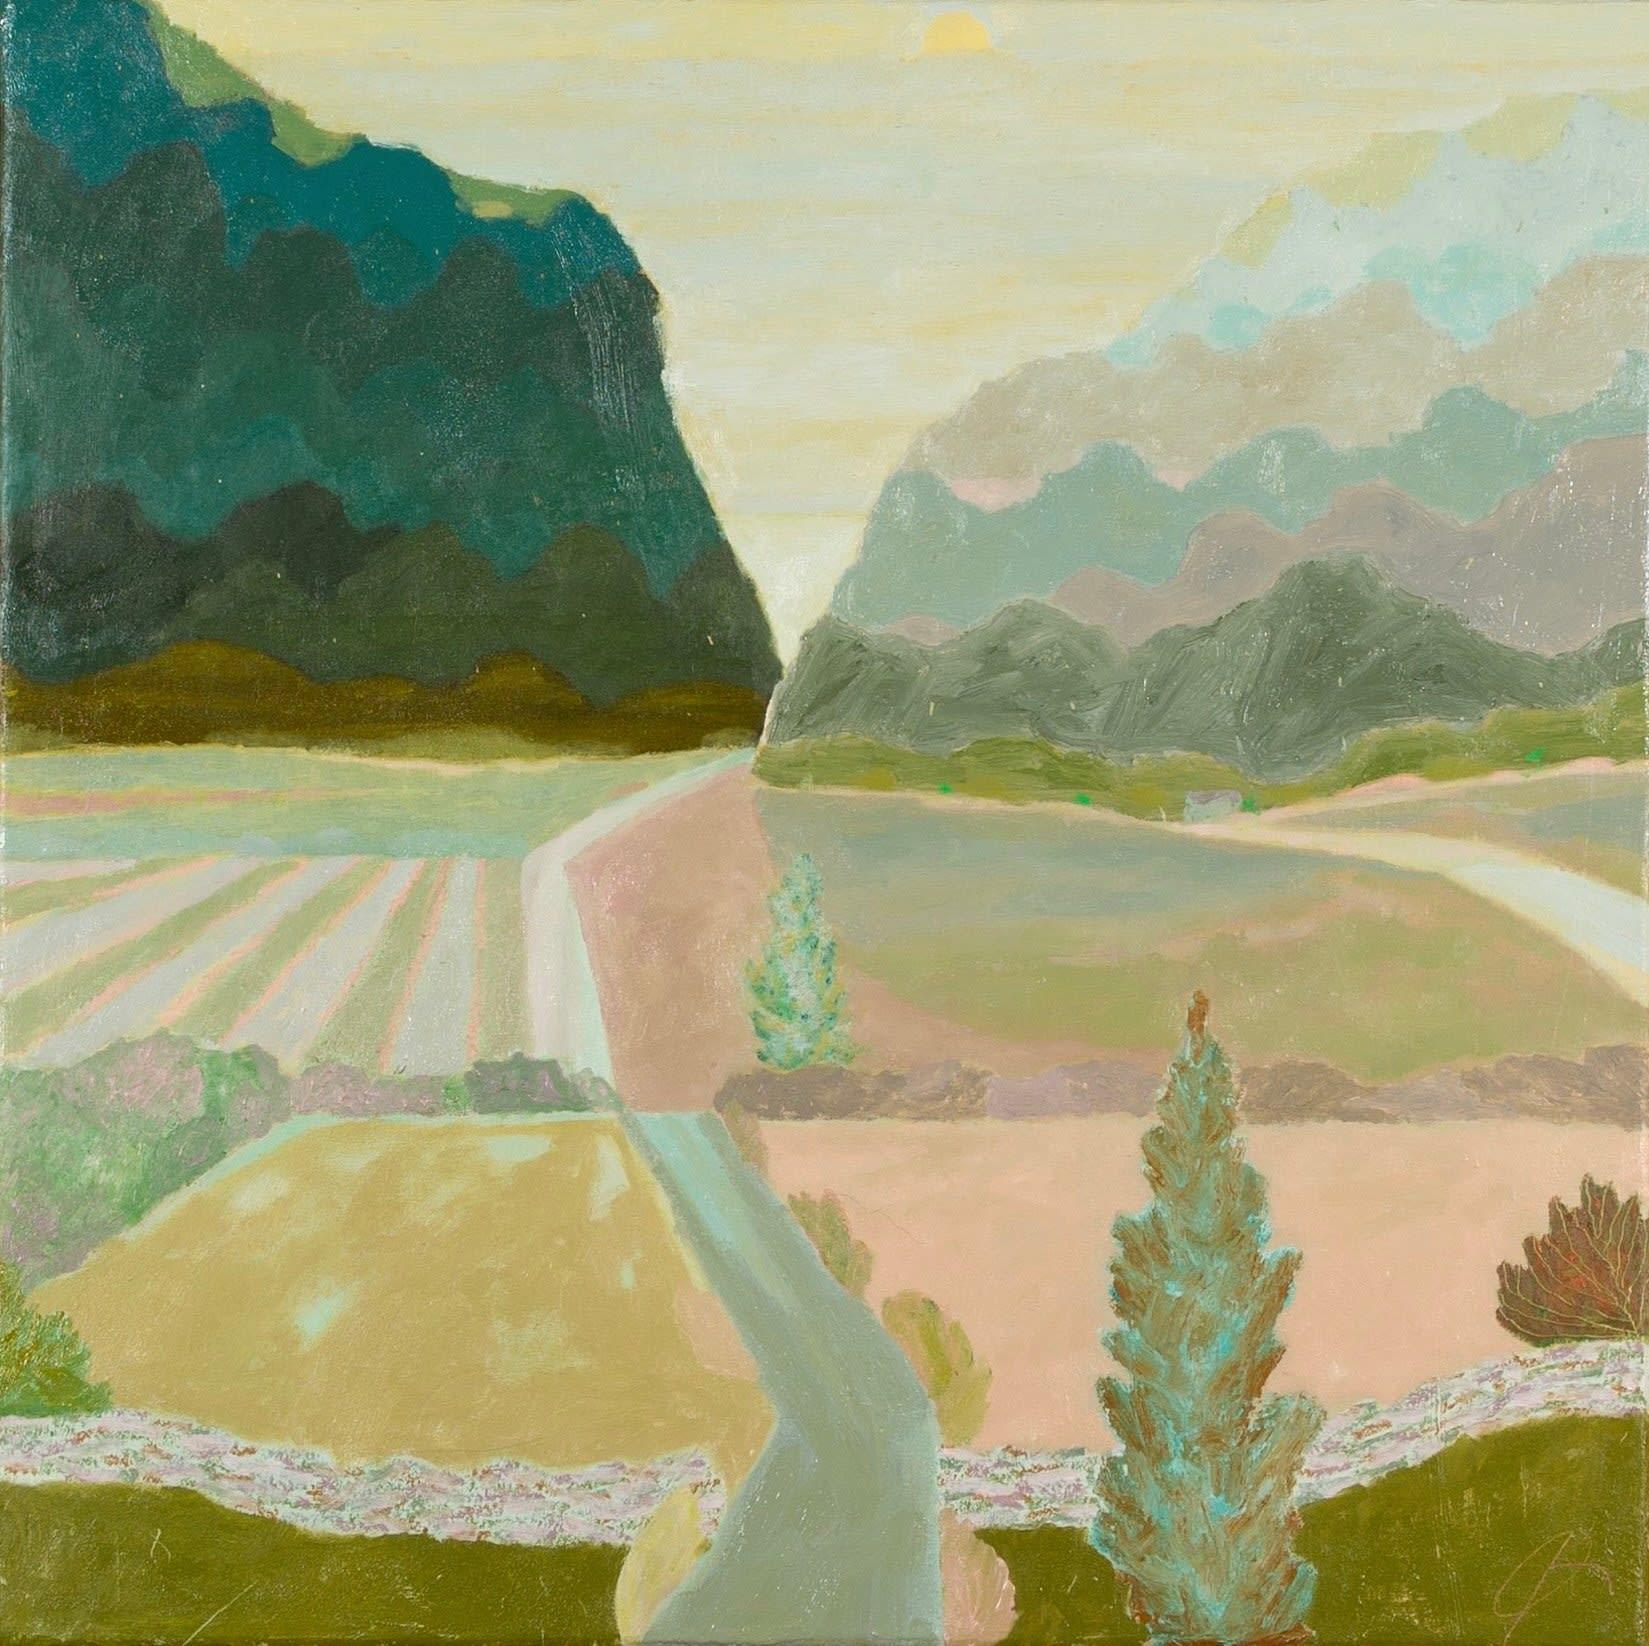 A Trip to the Hills, Oil on Canvas Painting by Richard Ballinger B. 1957, 2023

Additional information:
Medium: Oil on canvas
Dimensions: 50 x 50 cm
19 3/4 x 19 3/4 in
Signed, titled and dated verso

Richard Ballinger is a British landscape and